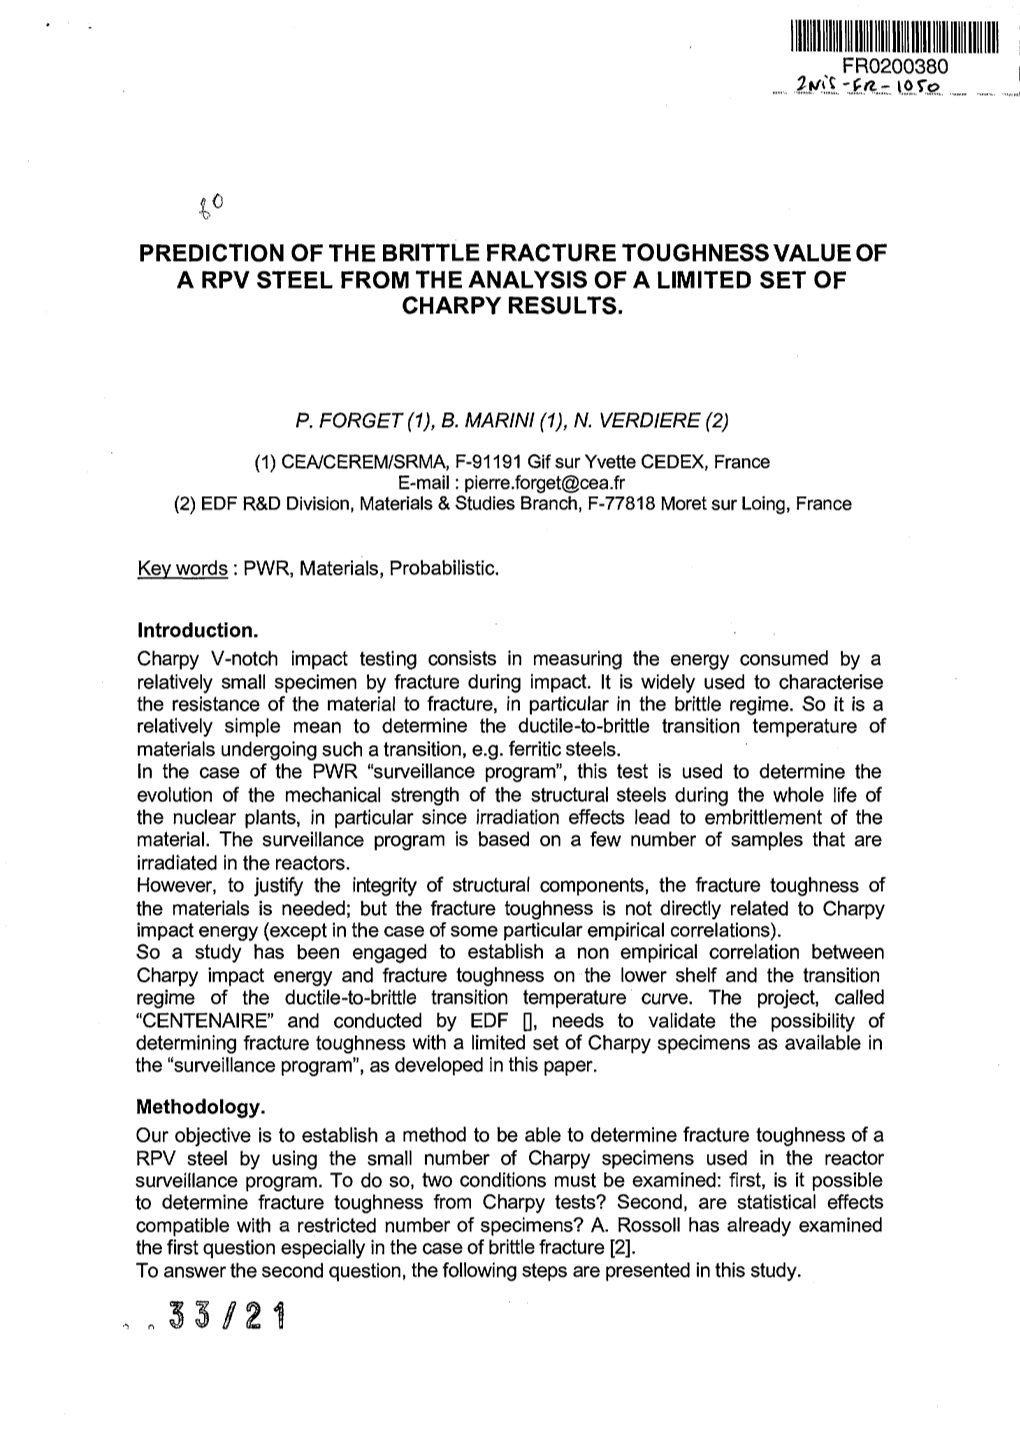 Prediction of the Brittle Fracture Toughness Value of a Rpv Steel from the Analysis of a Limited Set of Charpy Results